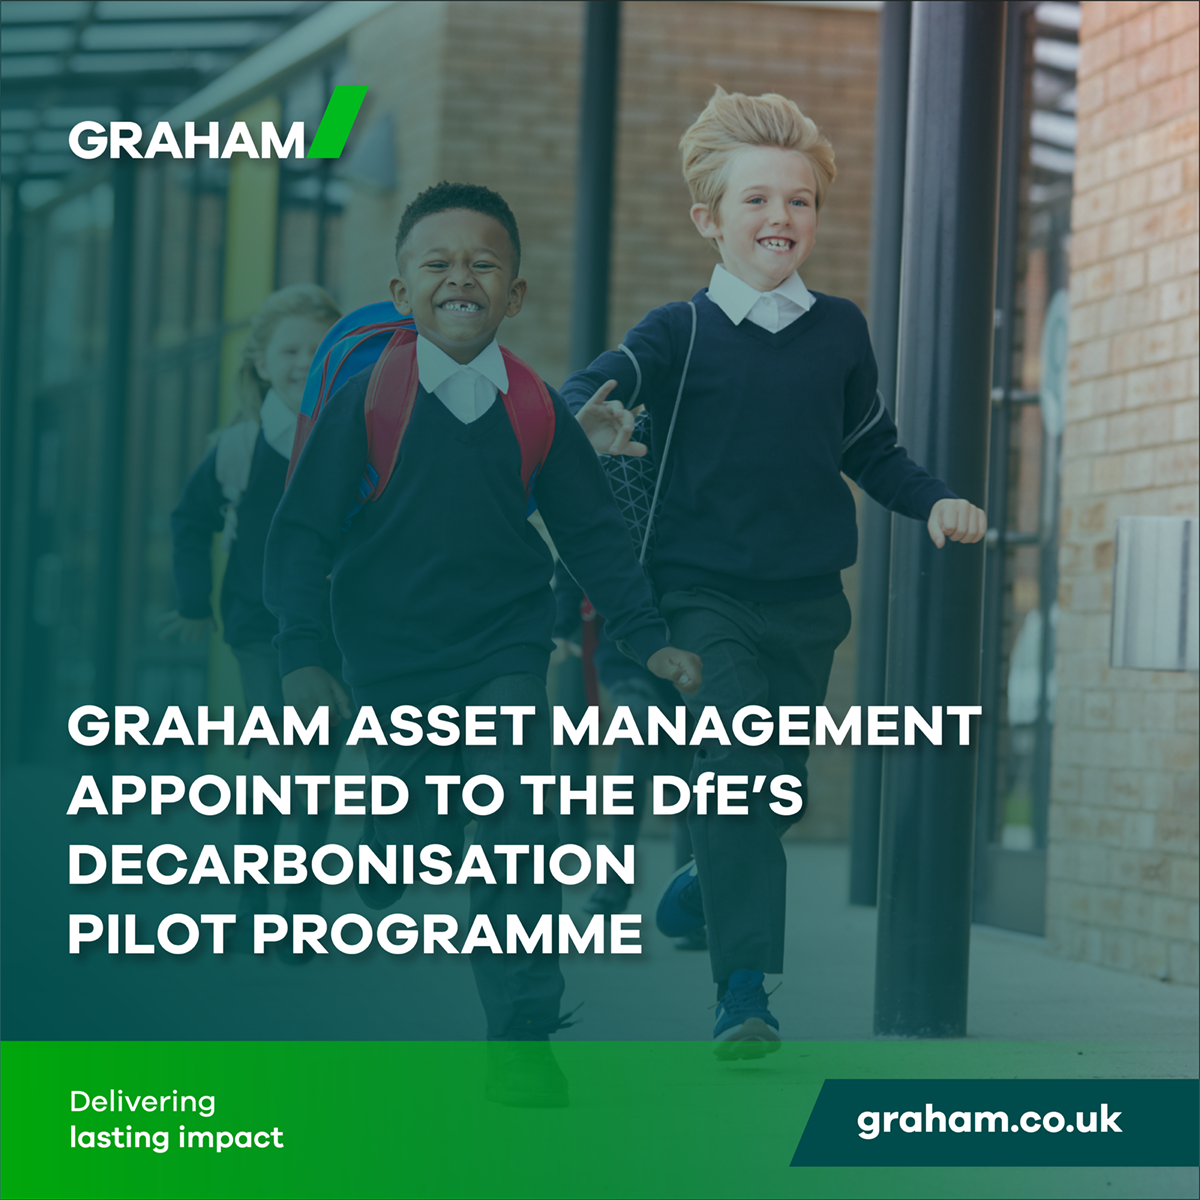 GRAHAM Asset Management appointed to the DfE’s decarbonisation pilot programme image